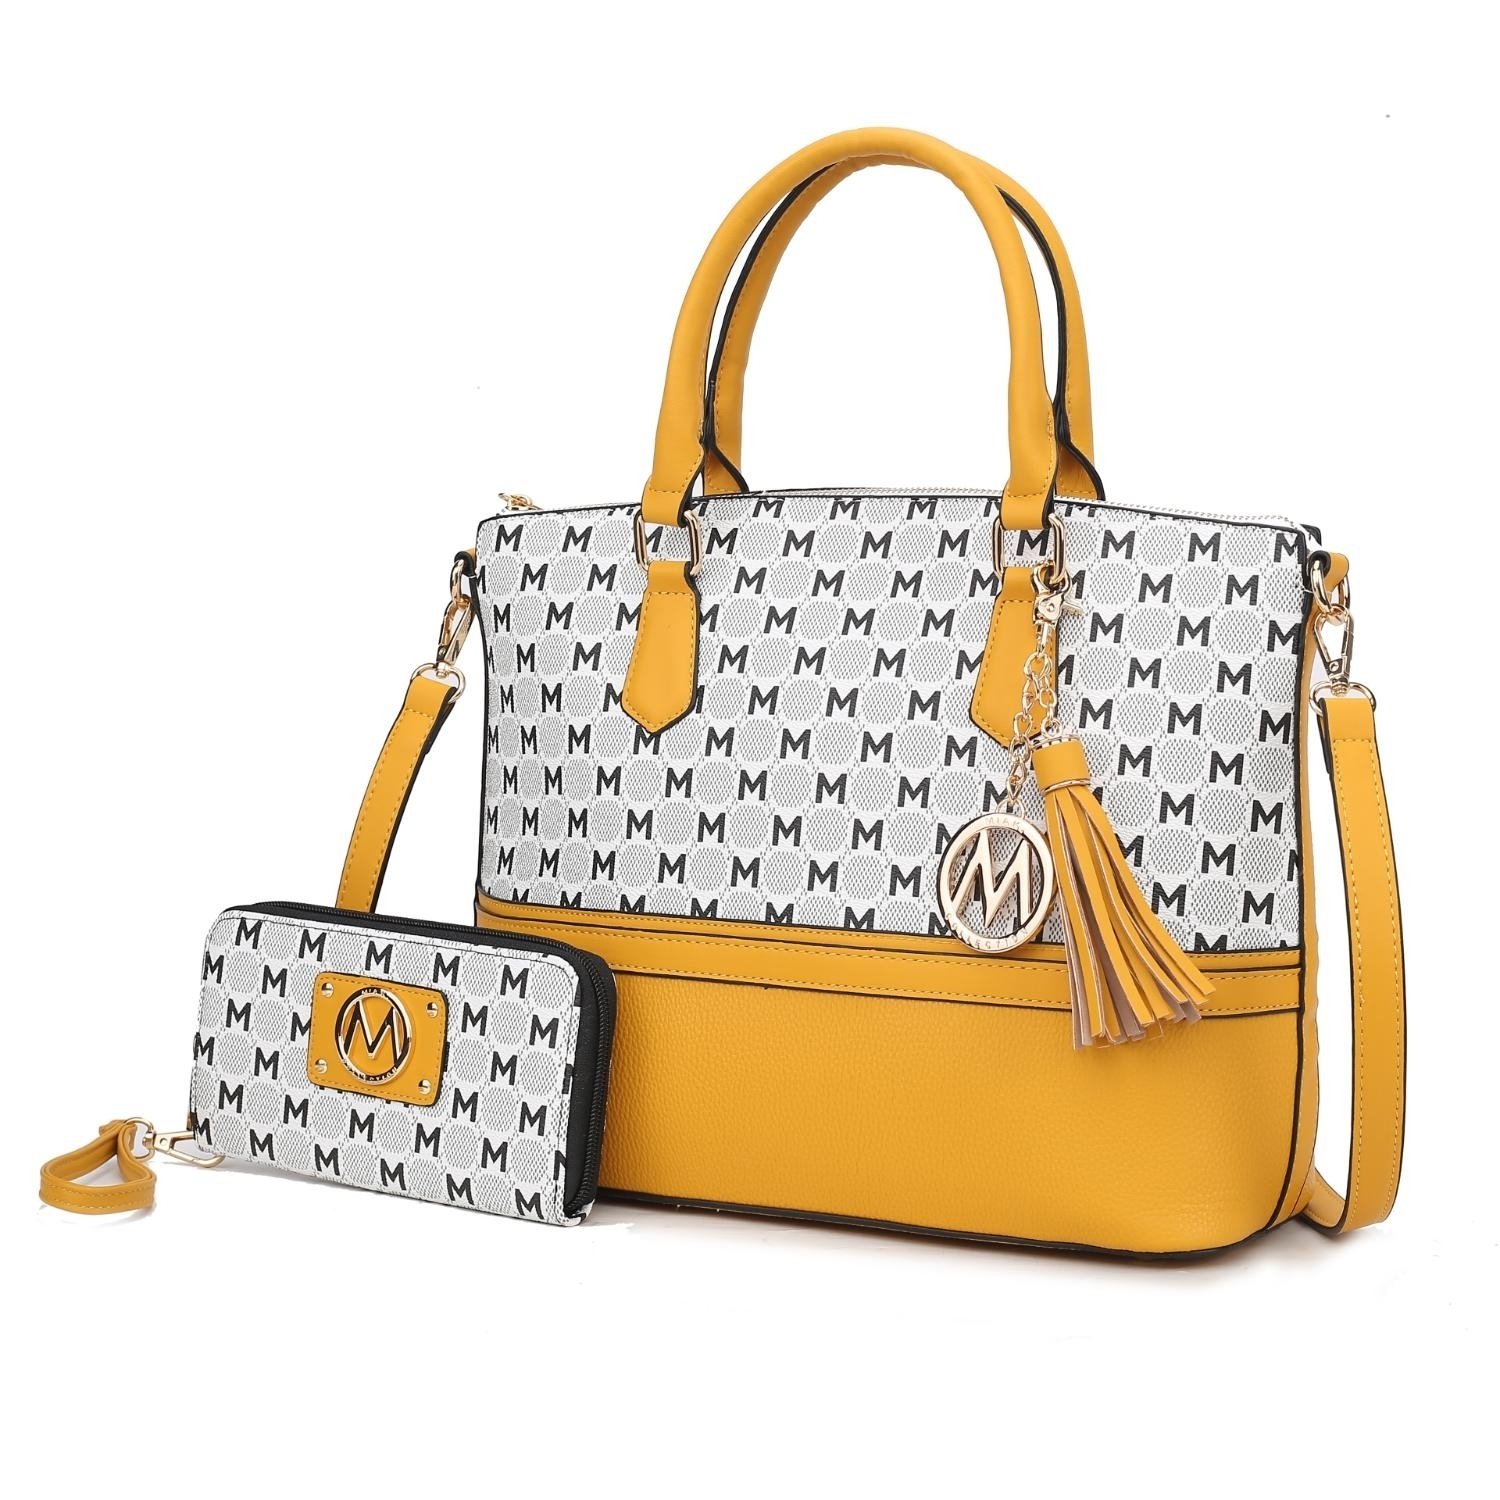 MKF Collection Saylor Circular M Emblem Print Women's Tote Bag With Matching Wristlet Wallet 2 Pieces By Mia K - Mustard